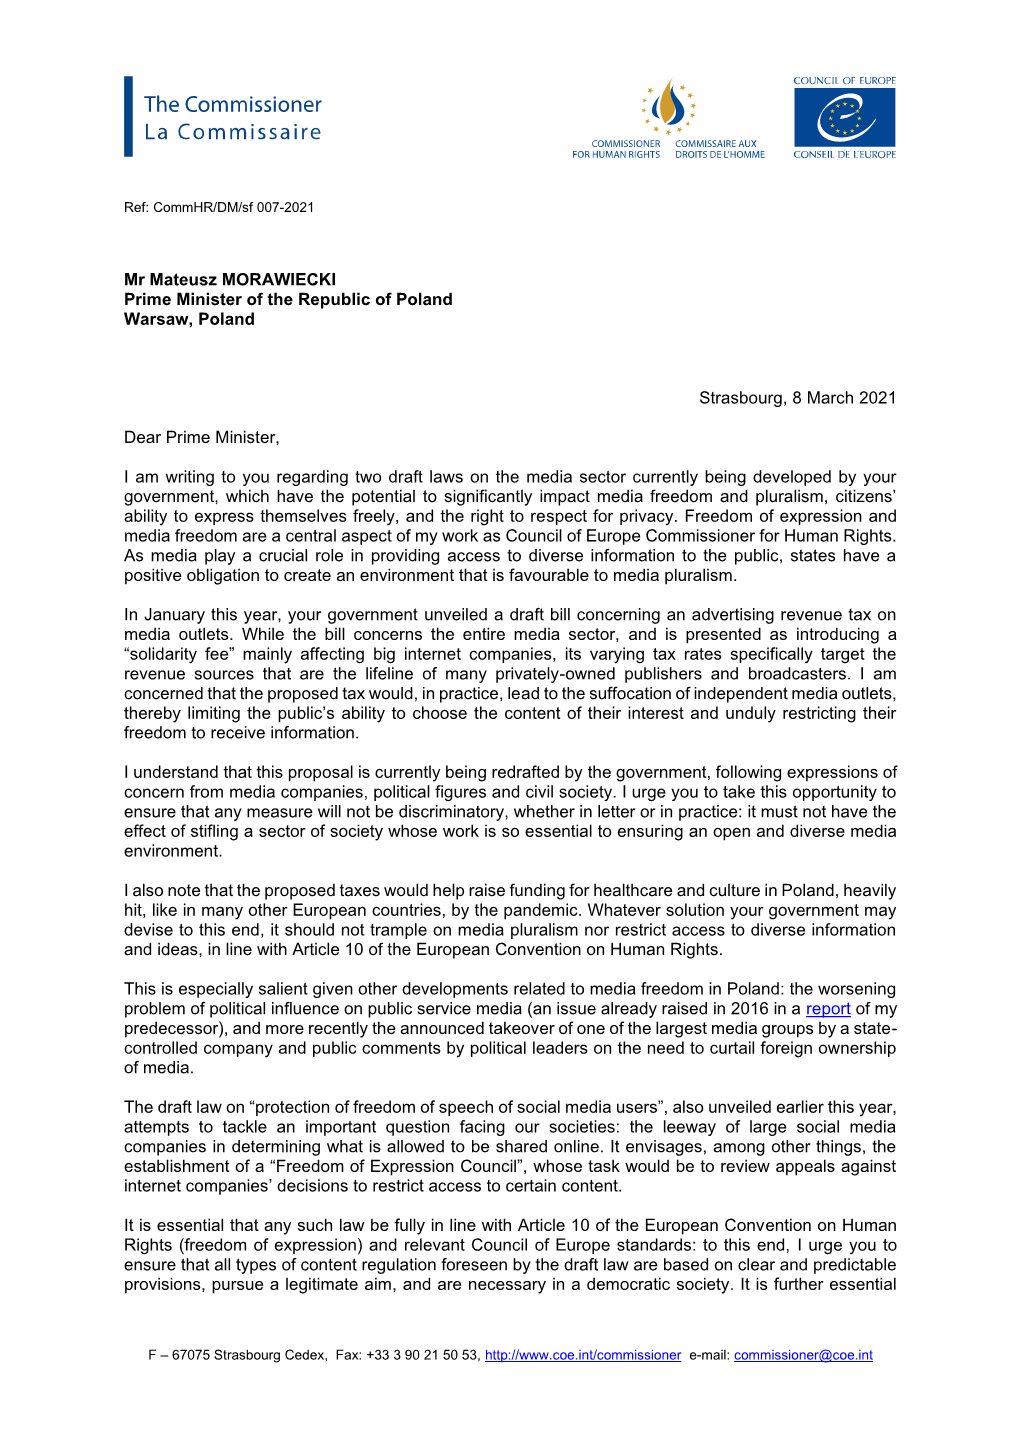 Letter to the Prime Minister of Poland